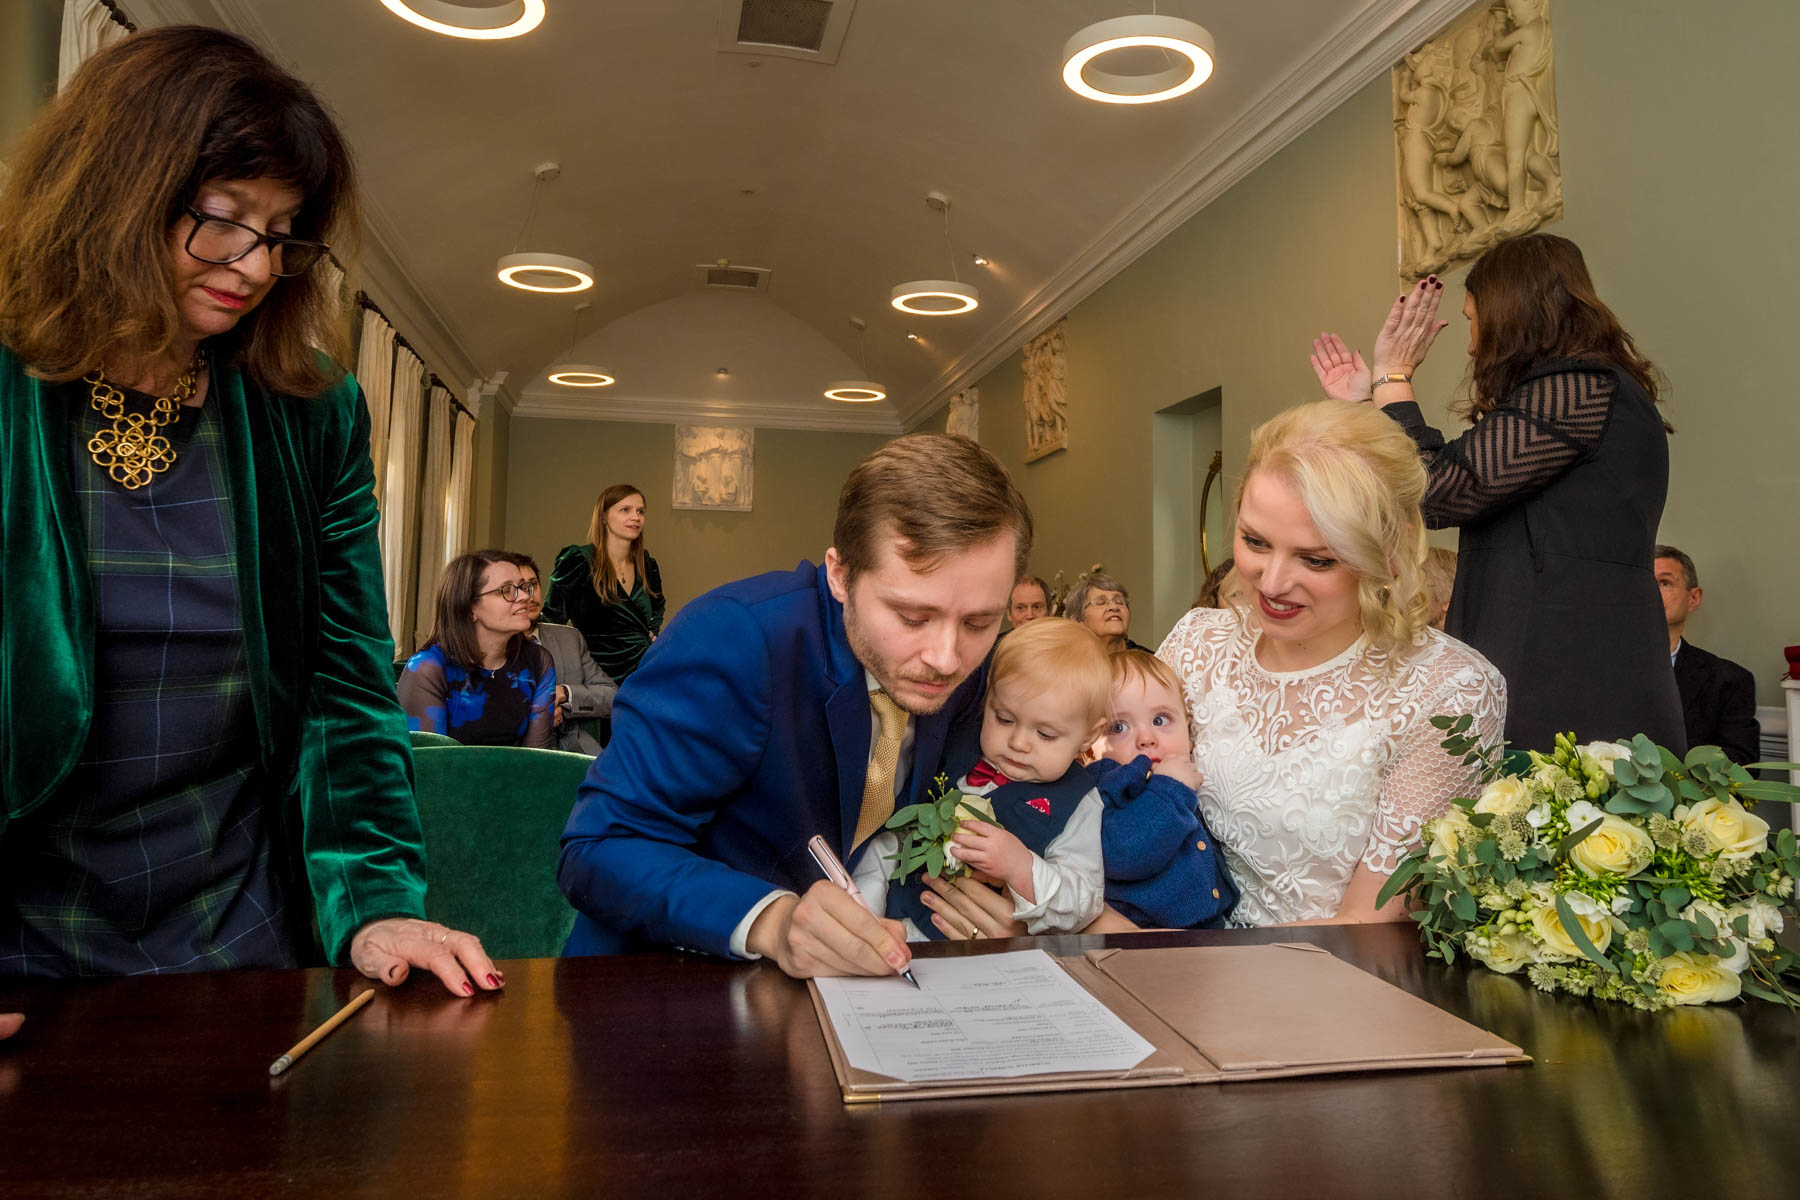 Groom signs wedding schedule as bride and 2 children watch in Loggia Room at York House.